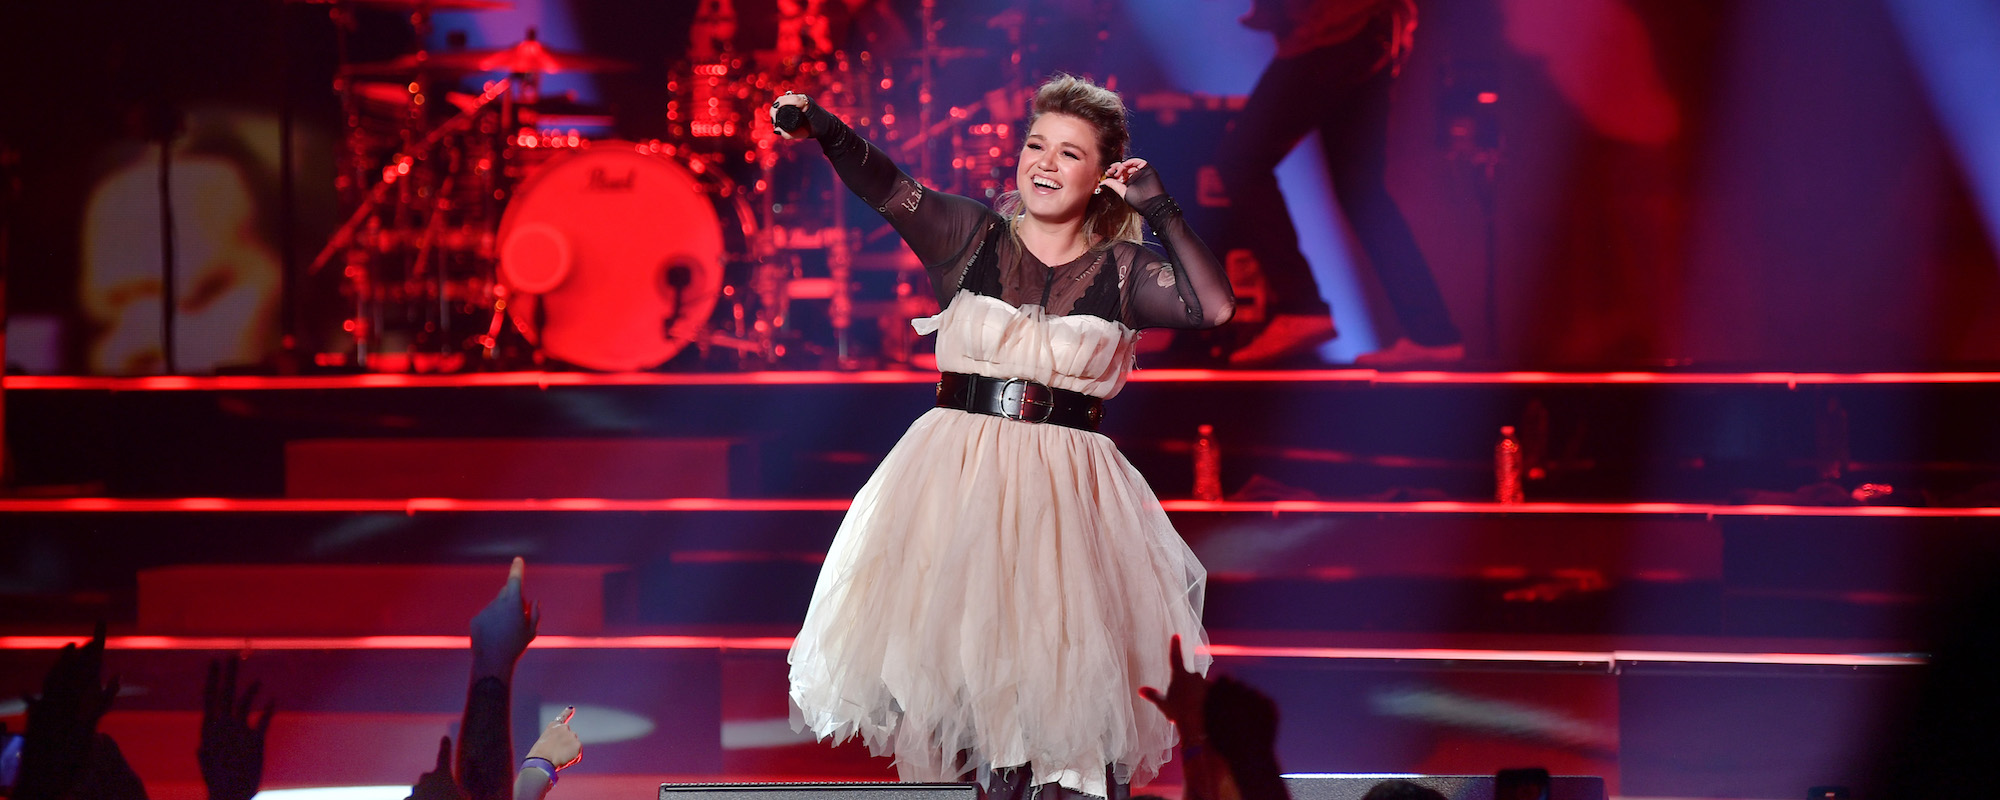 Kelly Clarkson Kicks off Sold-Out Las Vegas Residency Shows